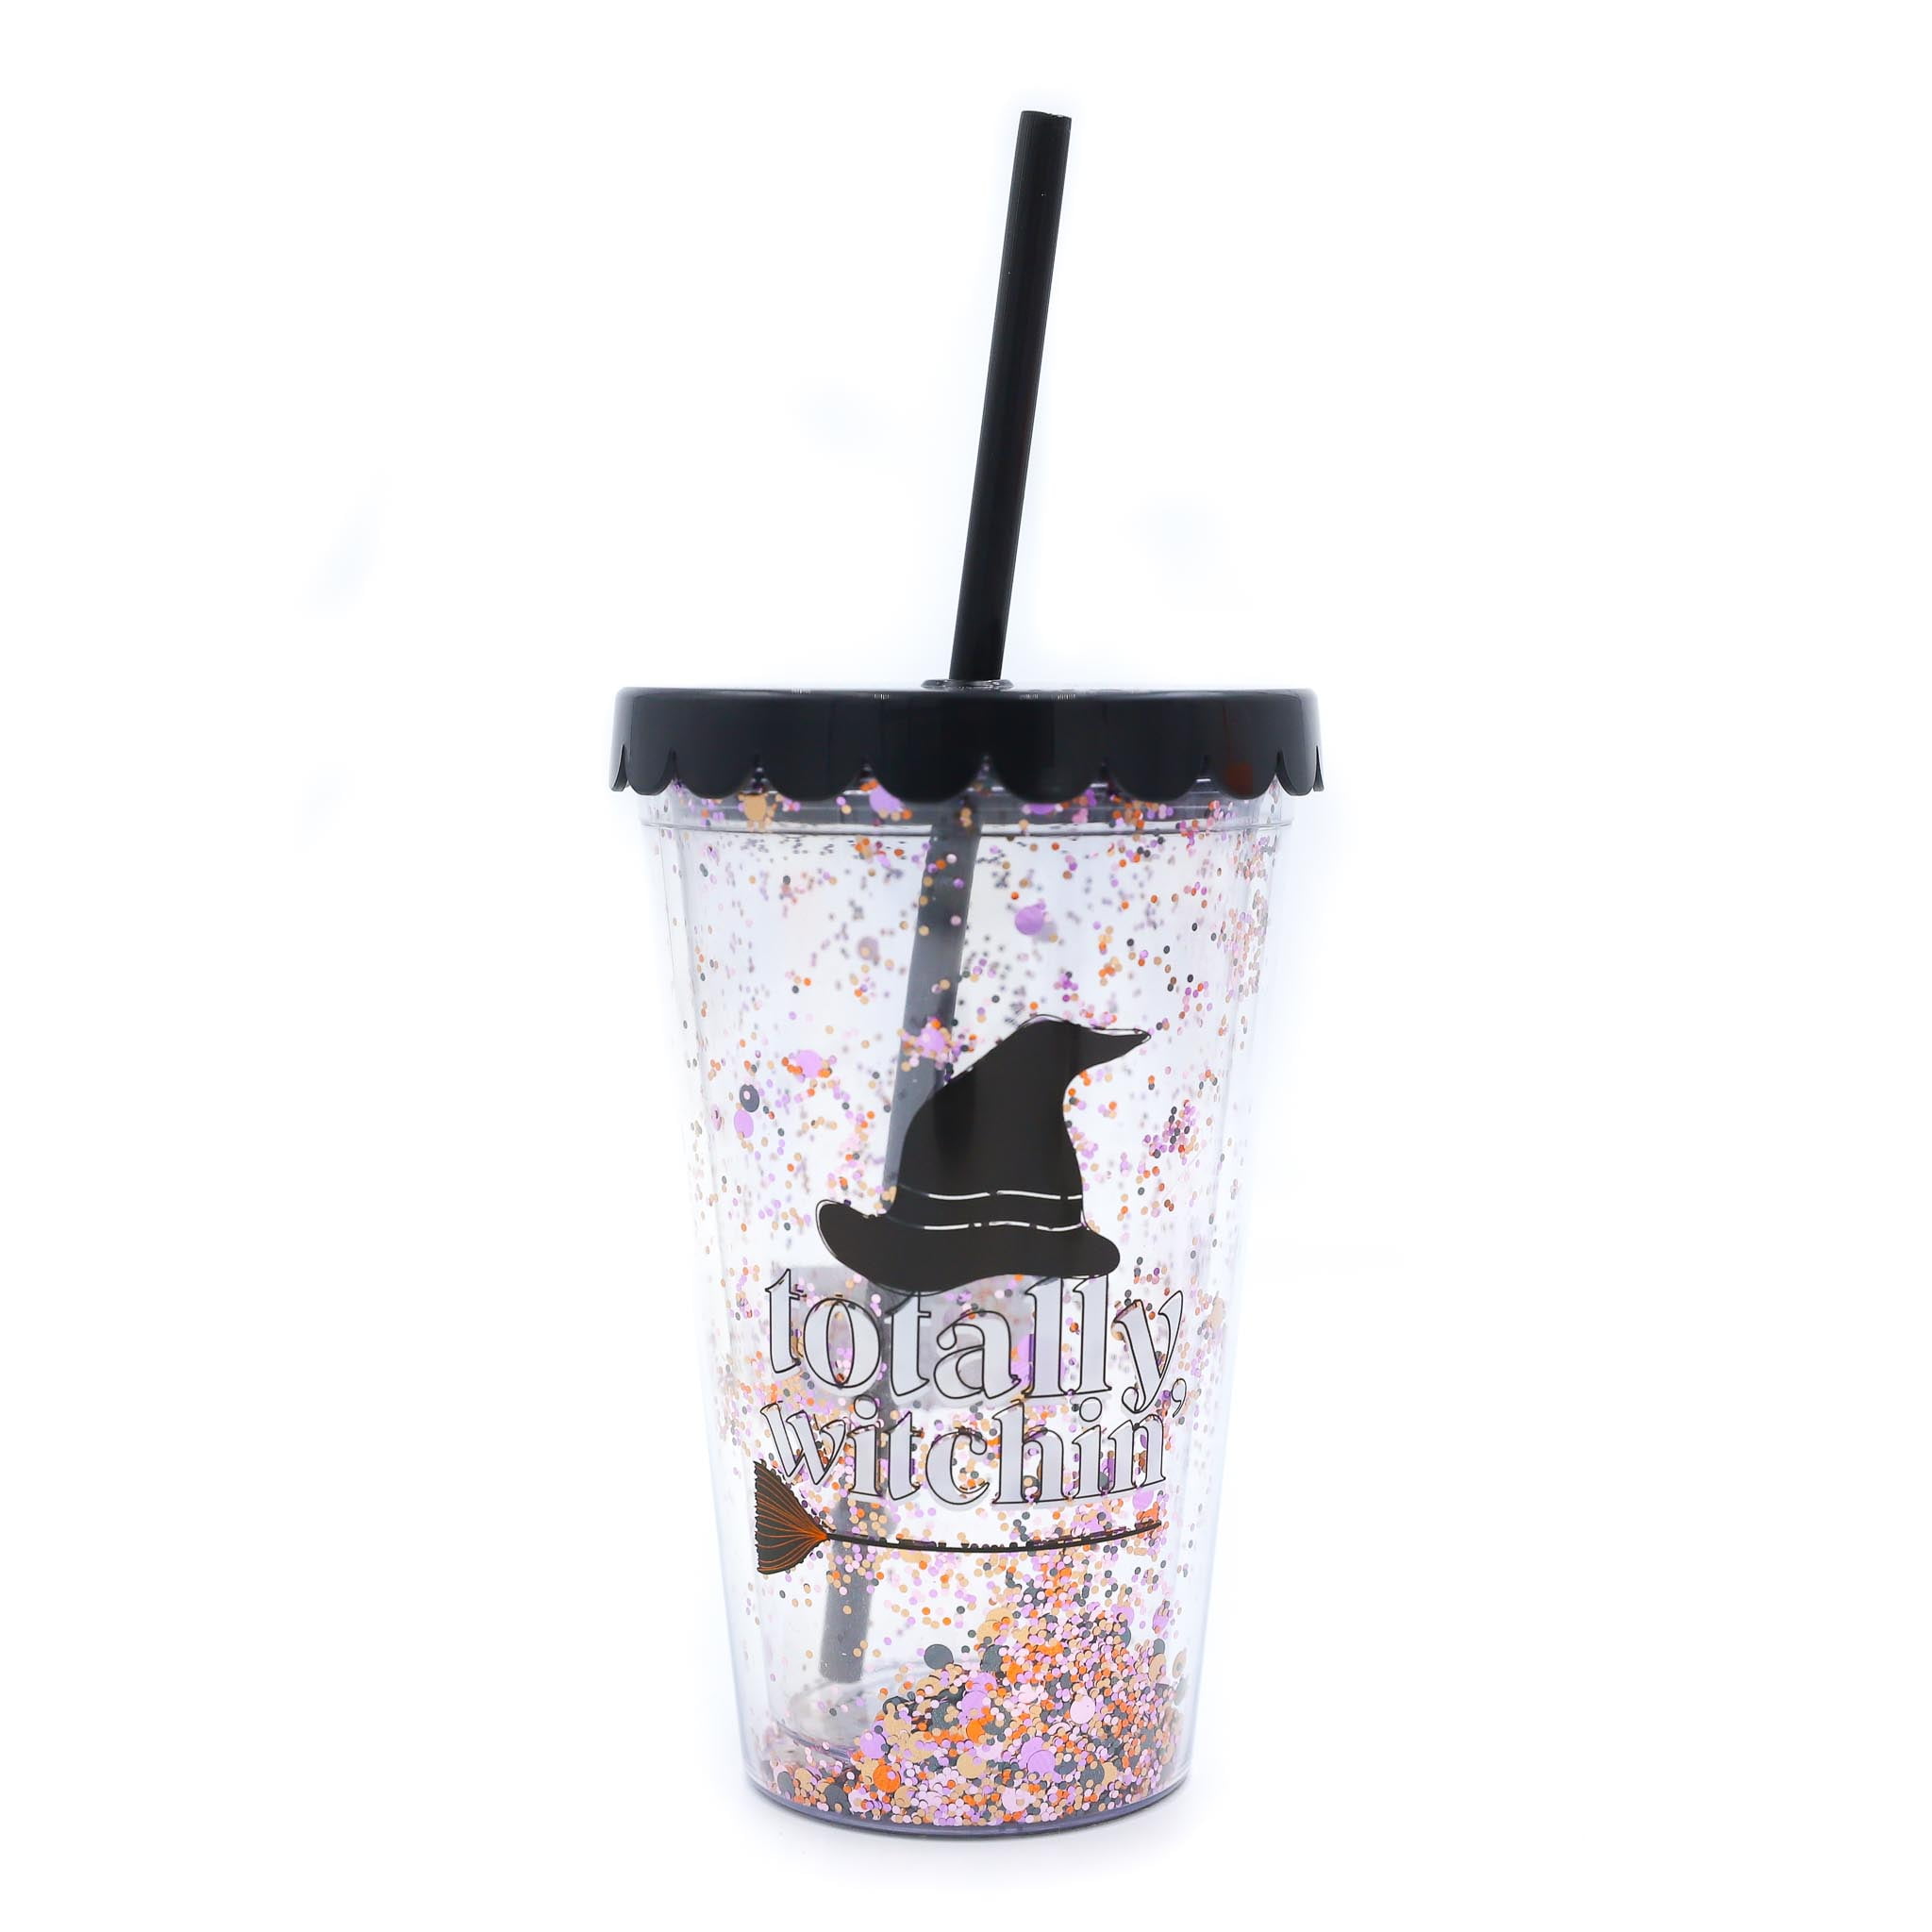 Kids Glittered 12 Oz Tumbler With Straw. Halloween Themed